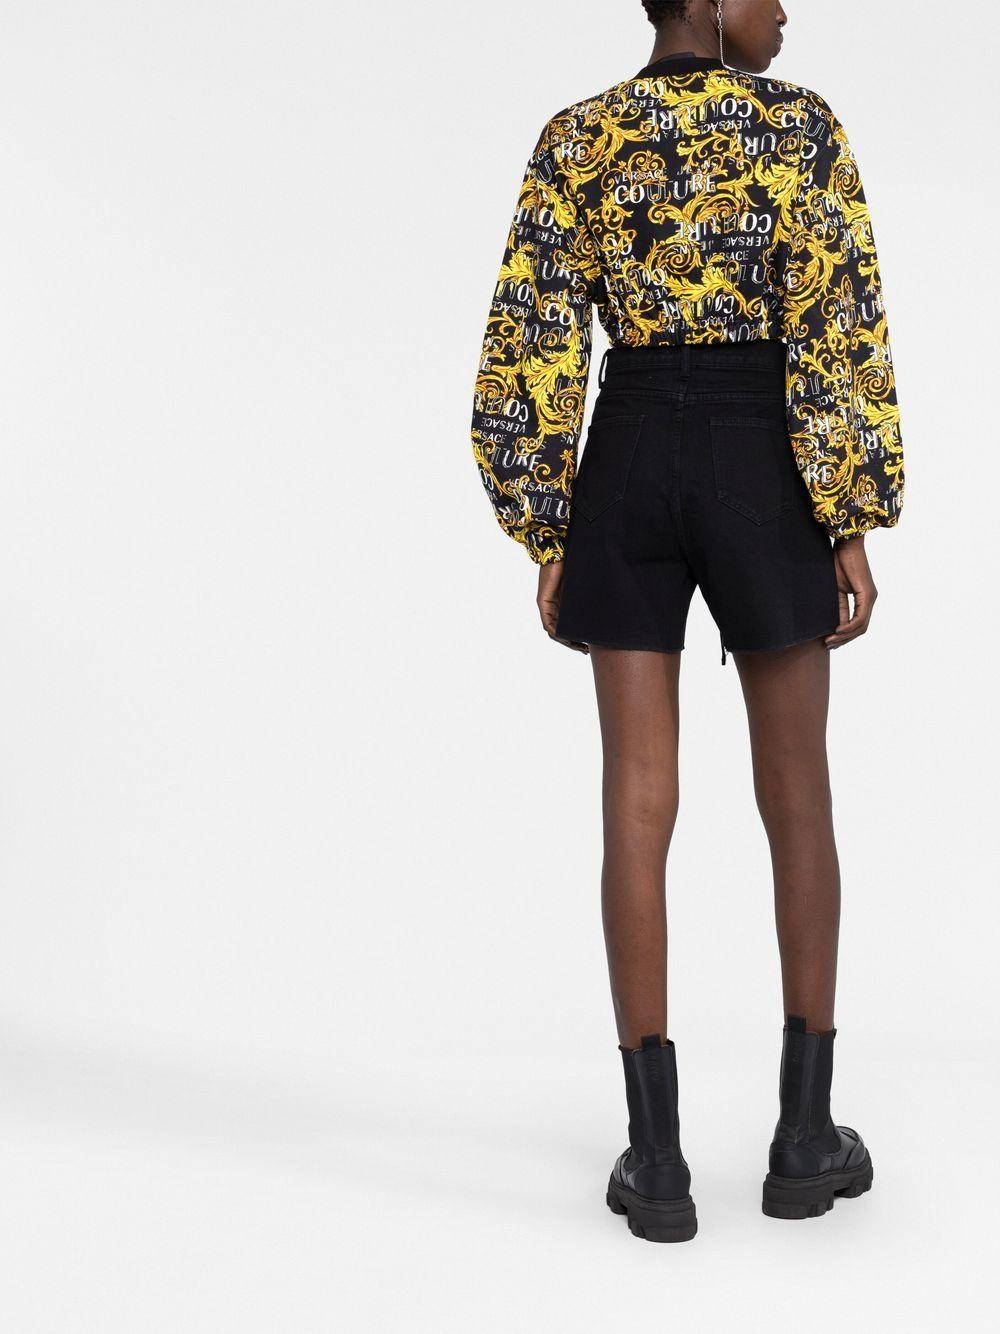 Versace Jeans Couture Baroque-print Cropped Sweatshirt in Black | Lyst